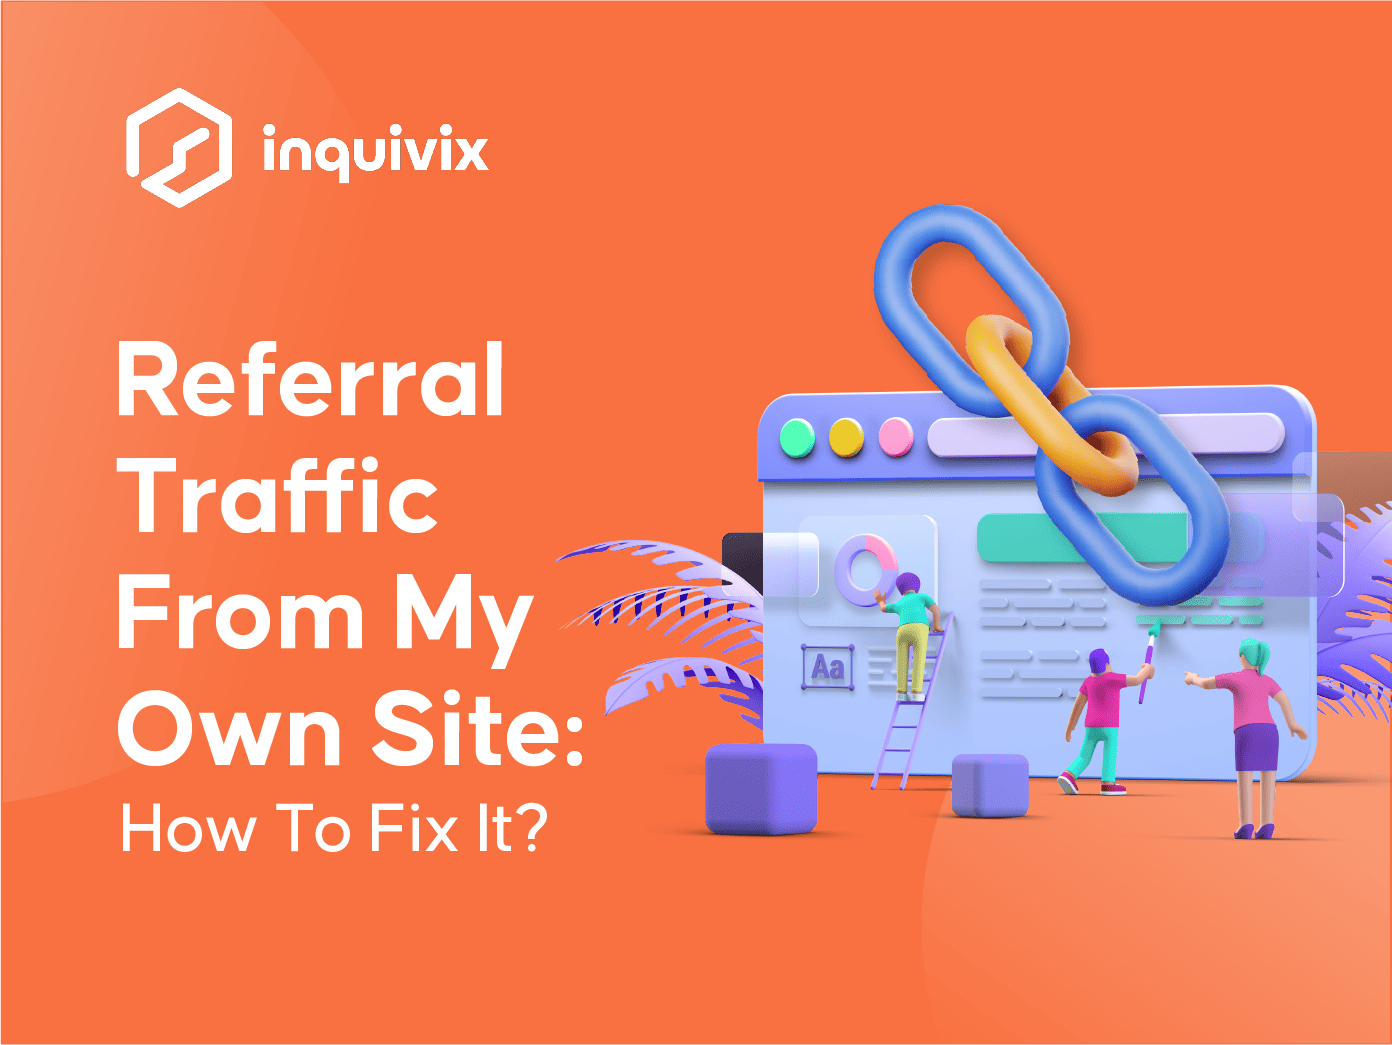 Referral Traffic From My Own Site: How To Fix It?